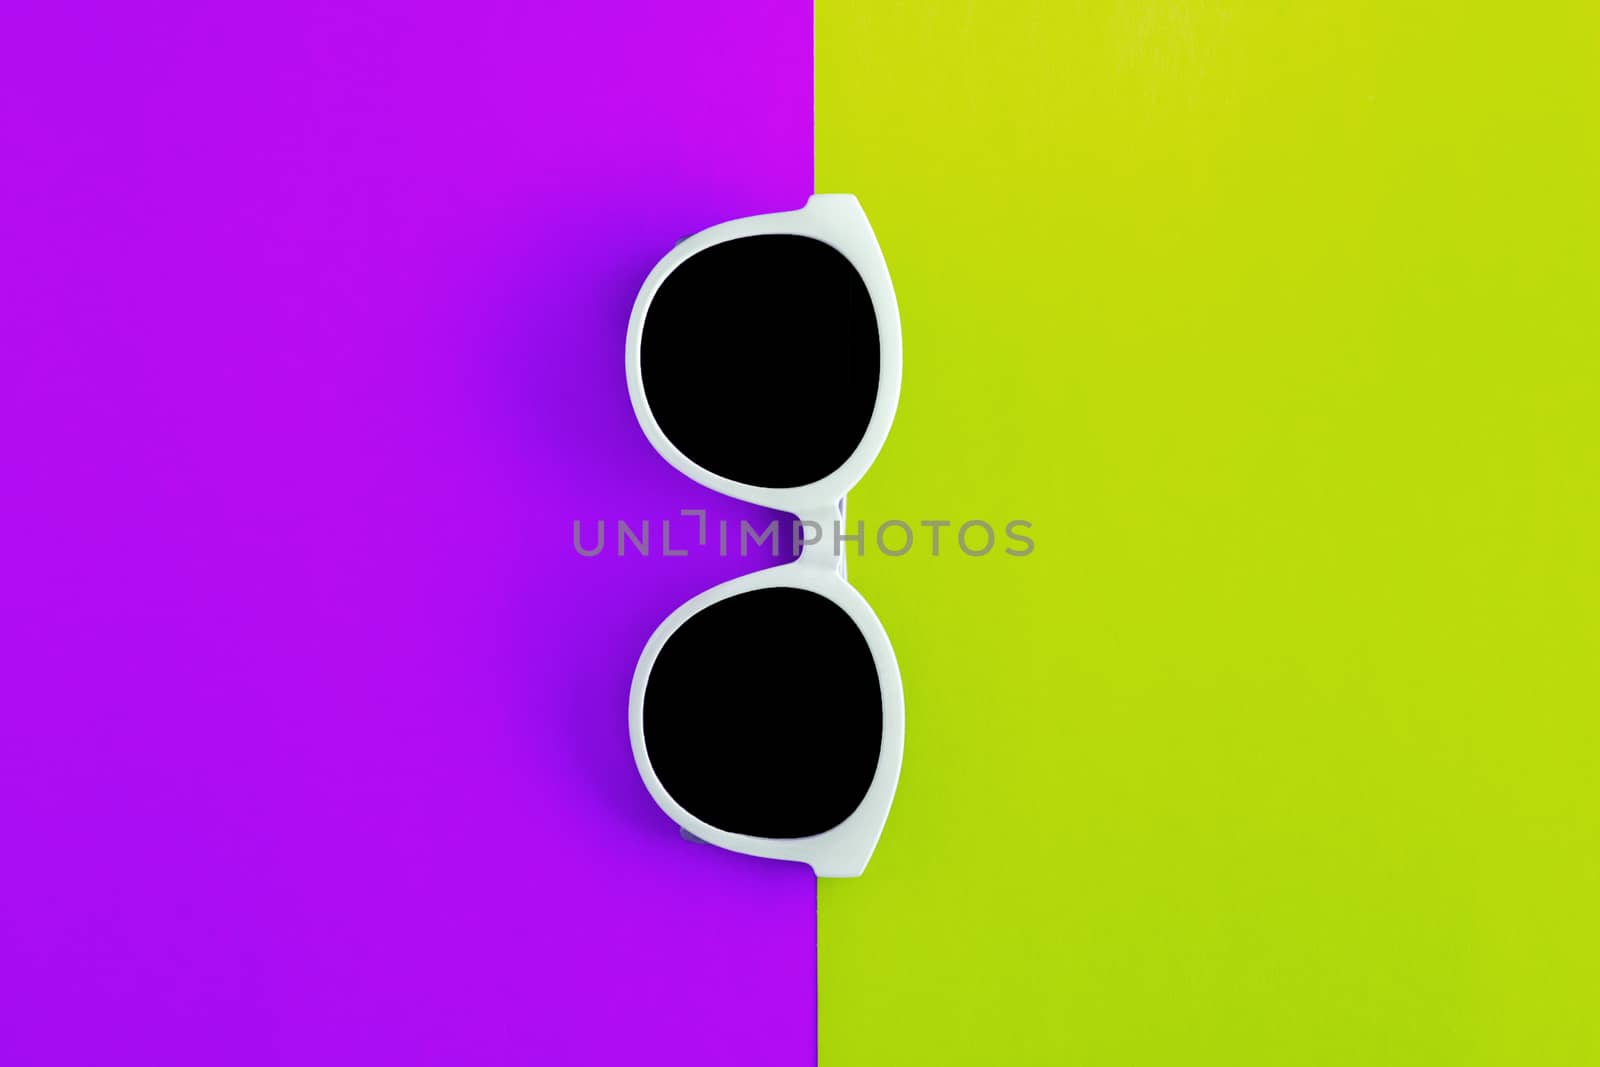 Sunny stylish white sunglasses on a bright purple-lilac and yellow-green background, top view, isolated. Copy space. Flat lay by Tanacha